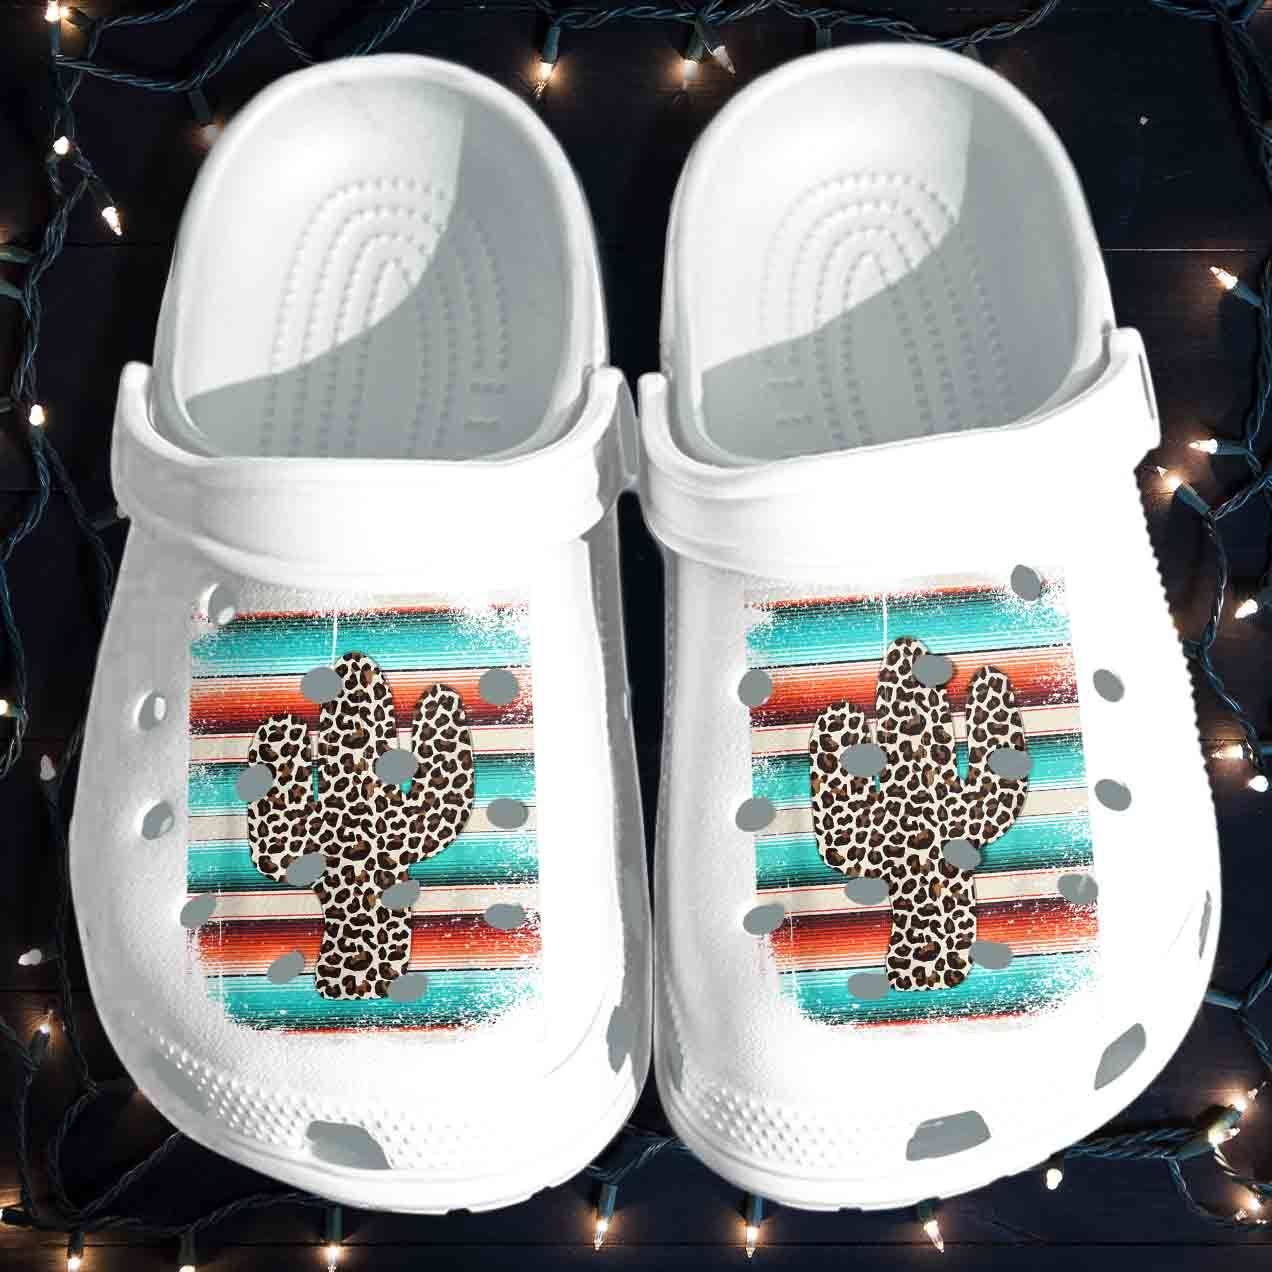 Leopard Cactus Serape Cactus Print Turquoise Shoes Crocss Gift For Man Woman – Cactus Leopard Clog Birthday Gift For Mother Day